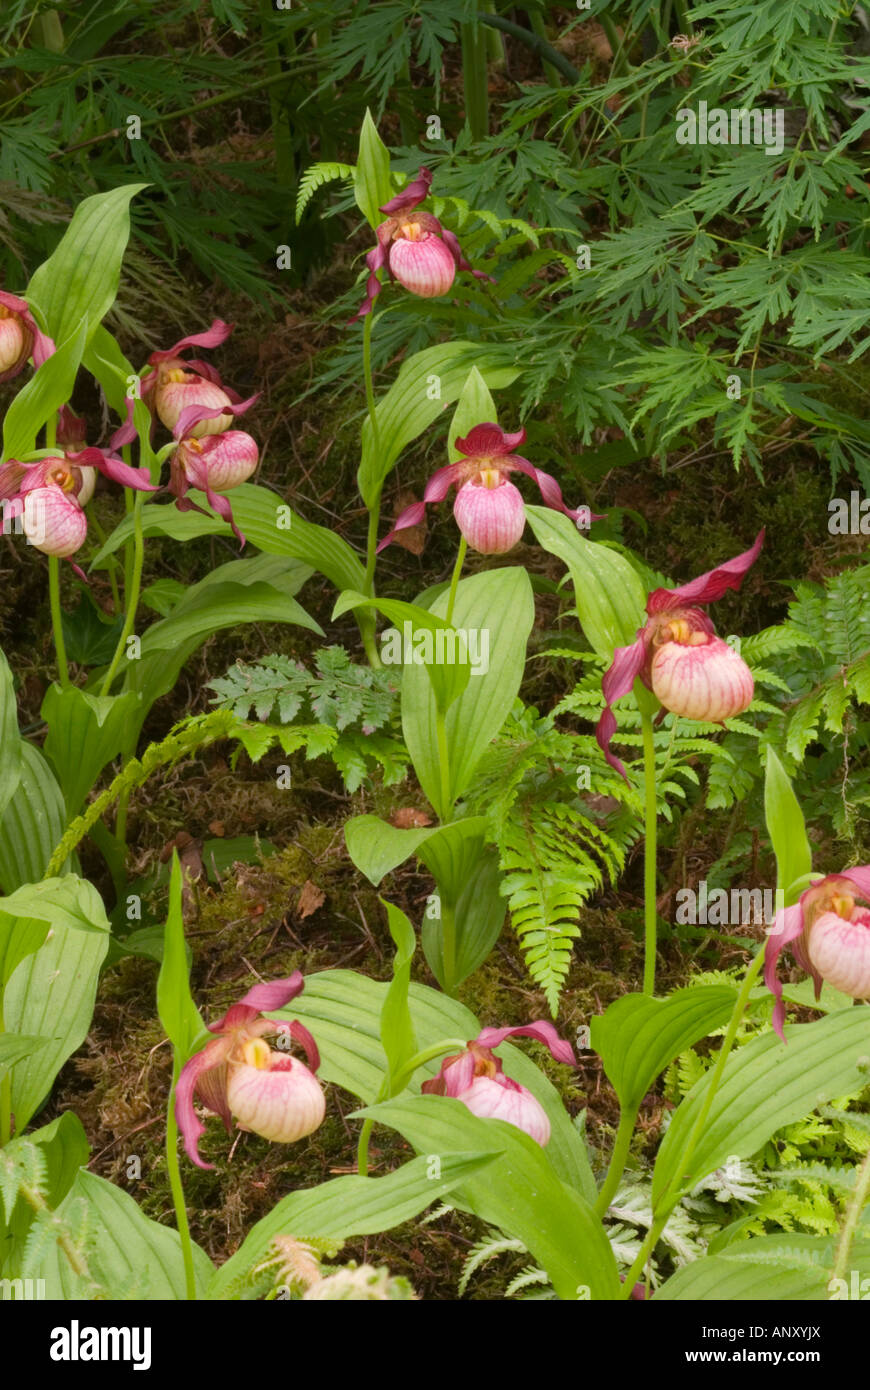 Cypripedium Gisela hybrid orchids lady's slippers ladyslippers Cypripedium macranthos x parviflorum, primary hybrid, blooming with big pouched lips Stock Photo